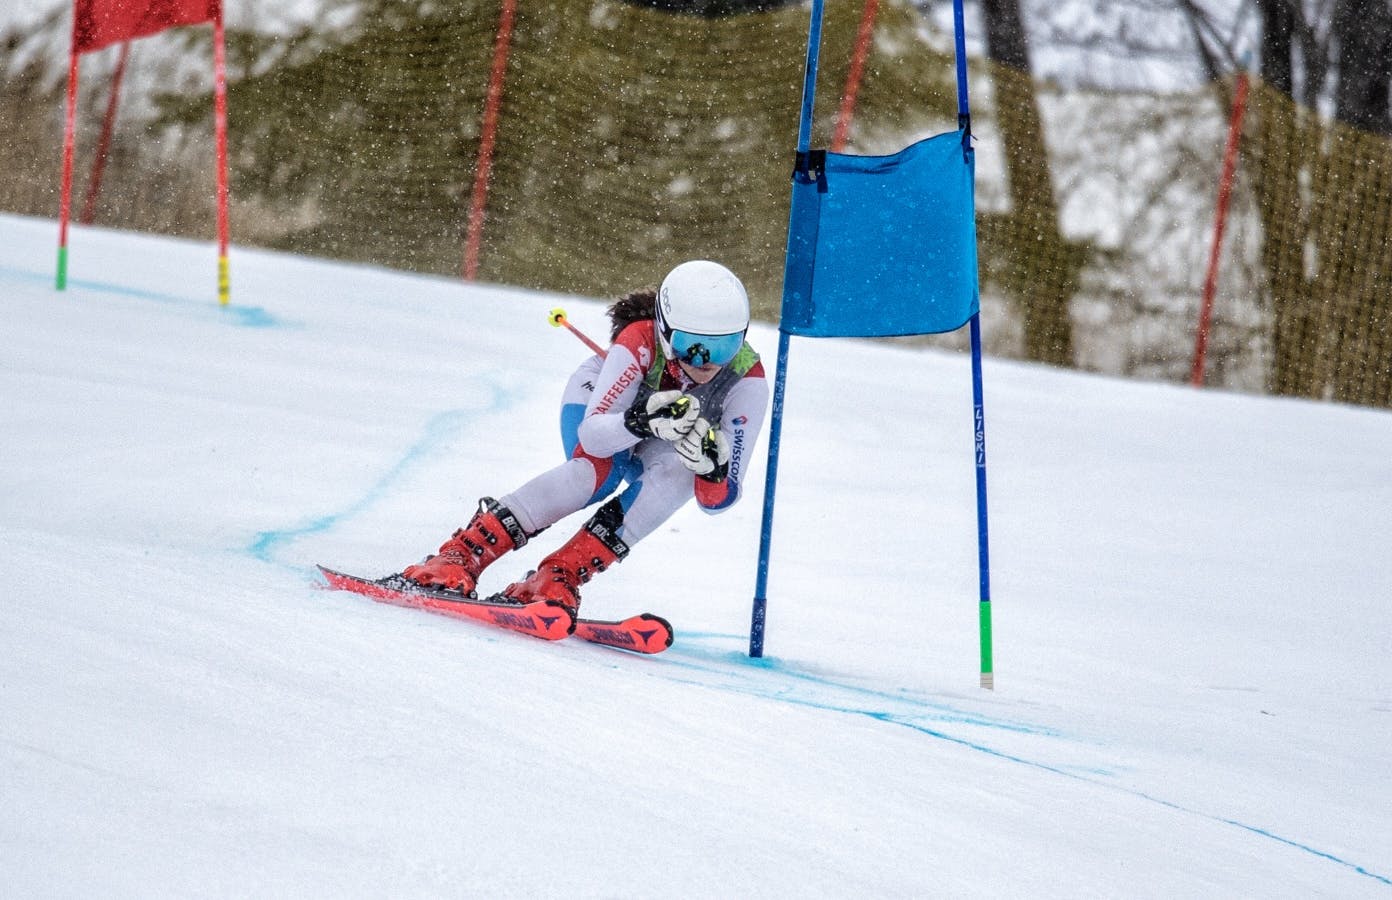 Older racer skiing down hill through flags